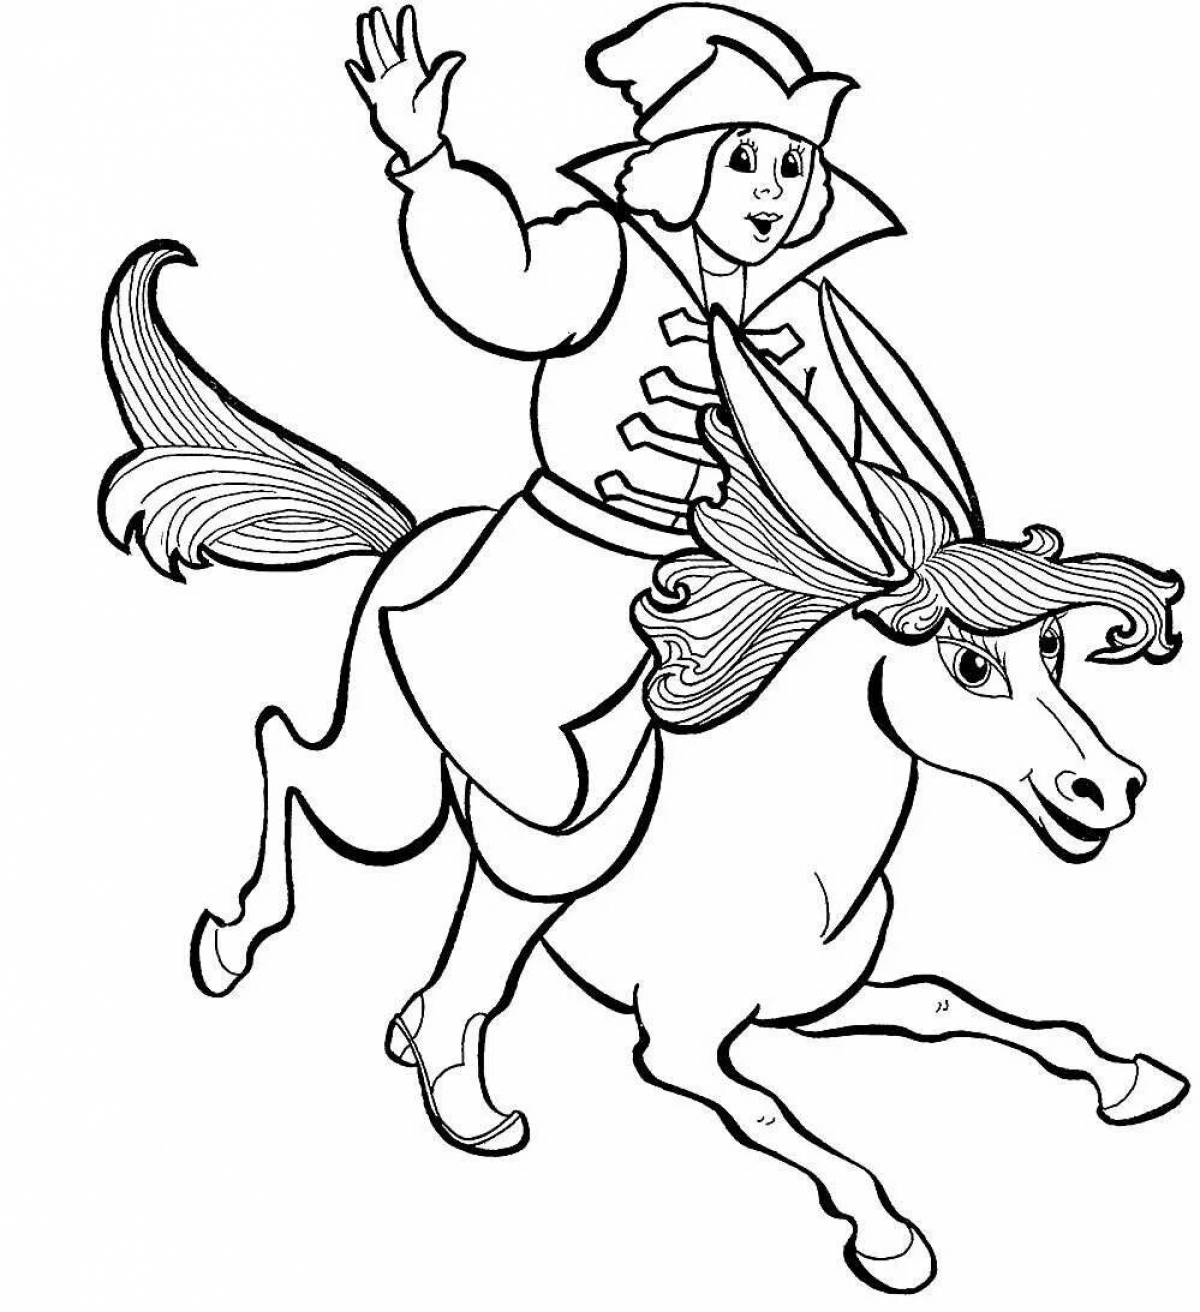 Humpbacked Horse coloring page filled with flowers